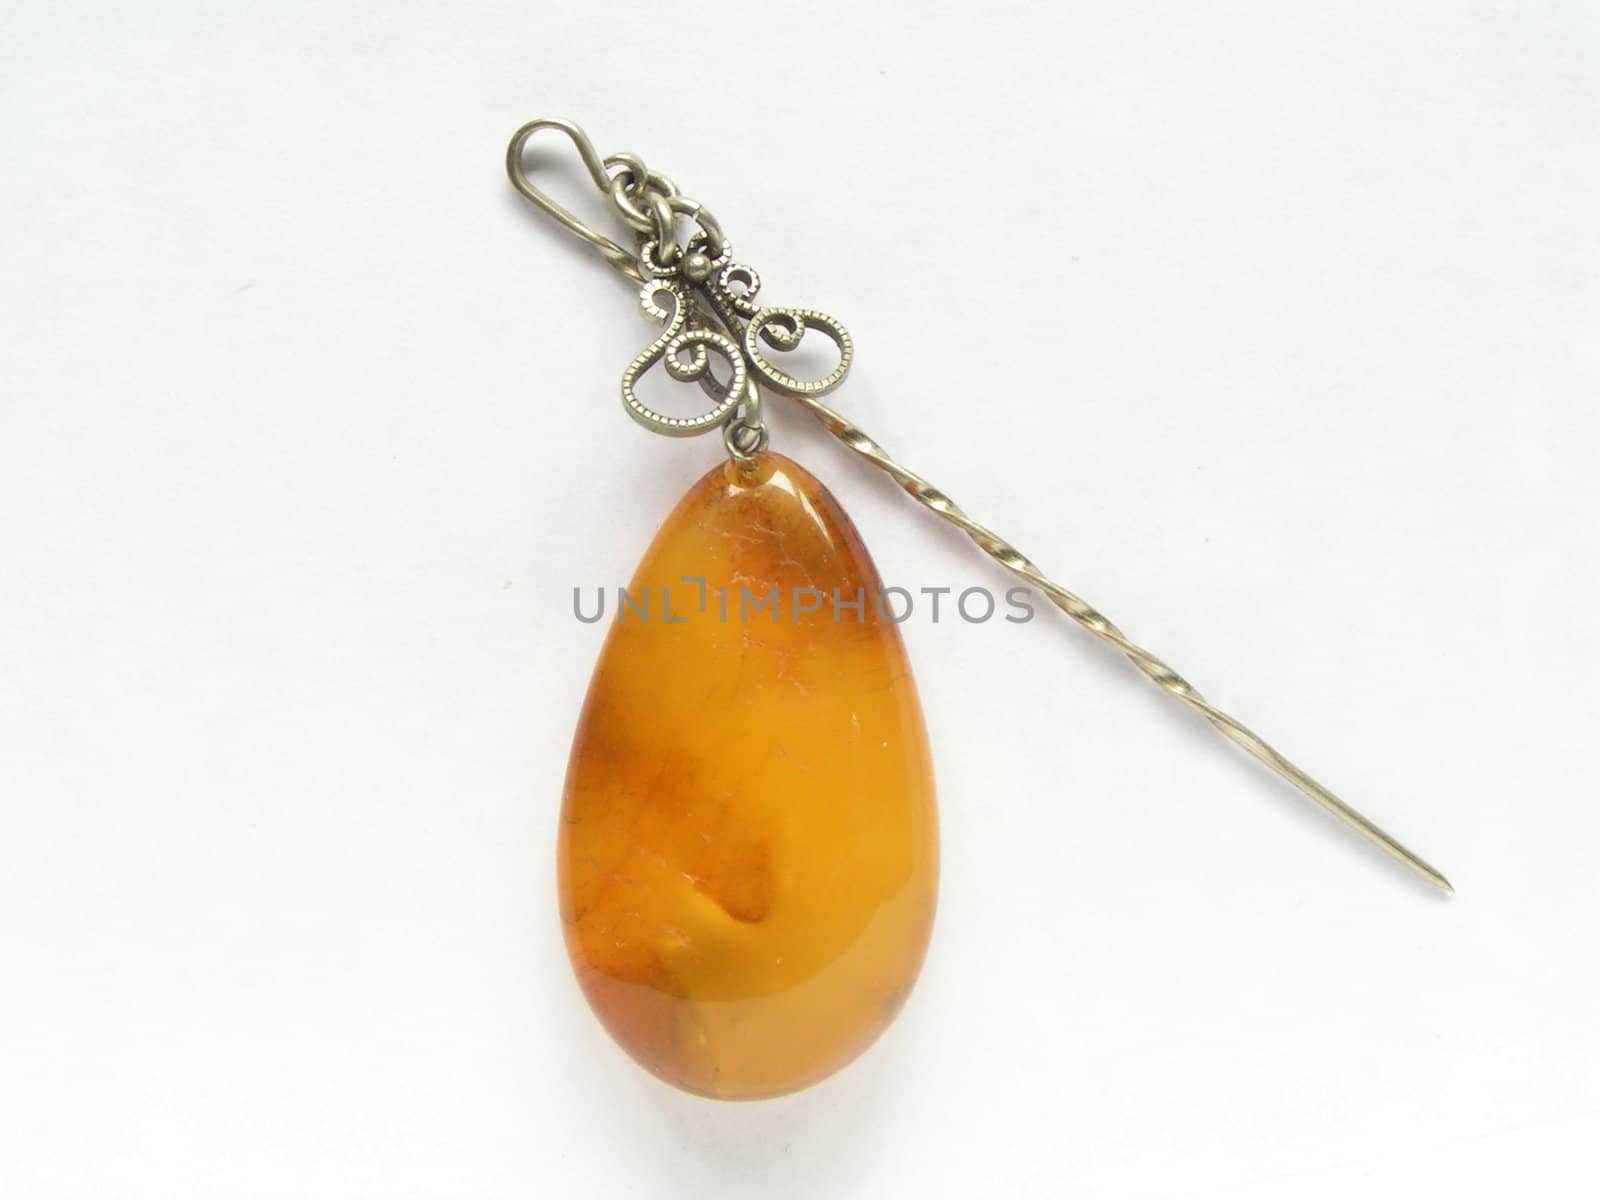 Decorative pin with amber on white background (mass market production)